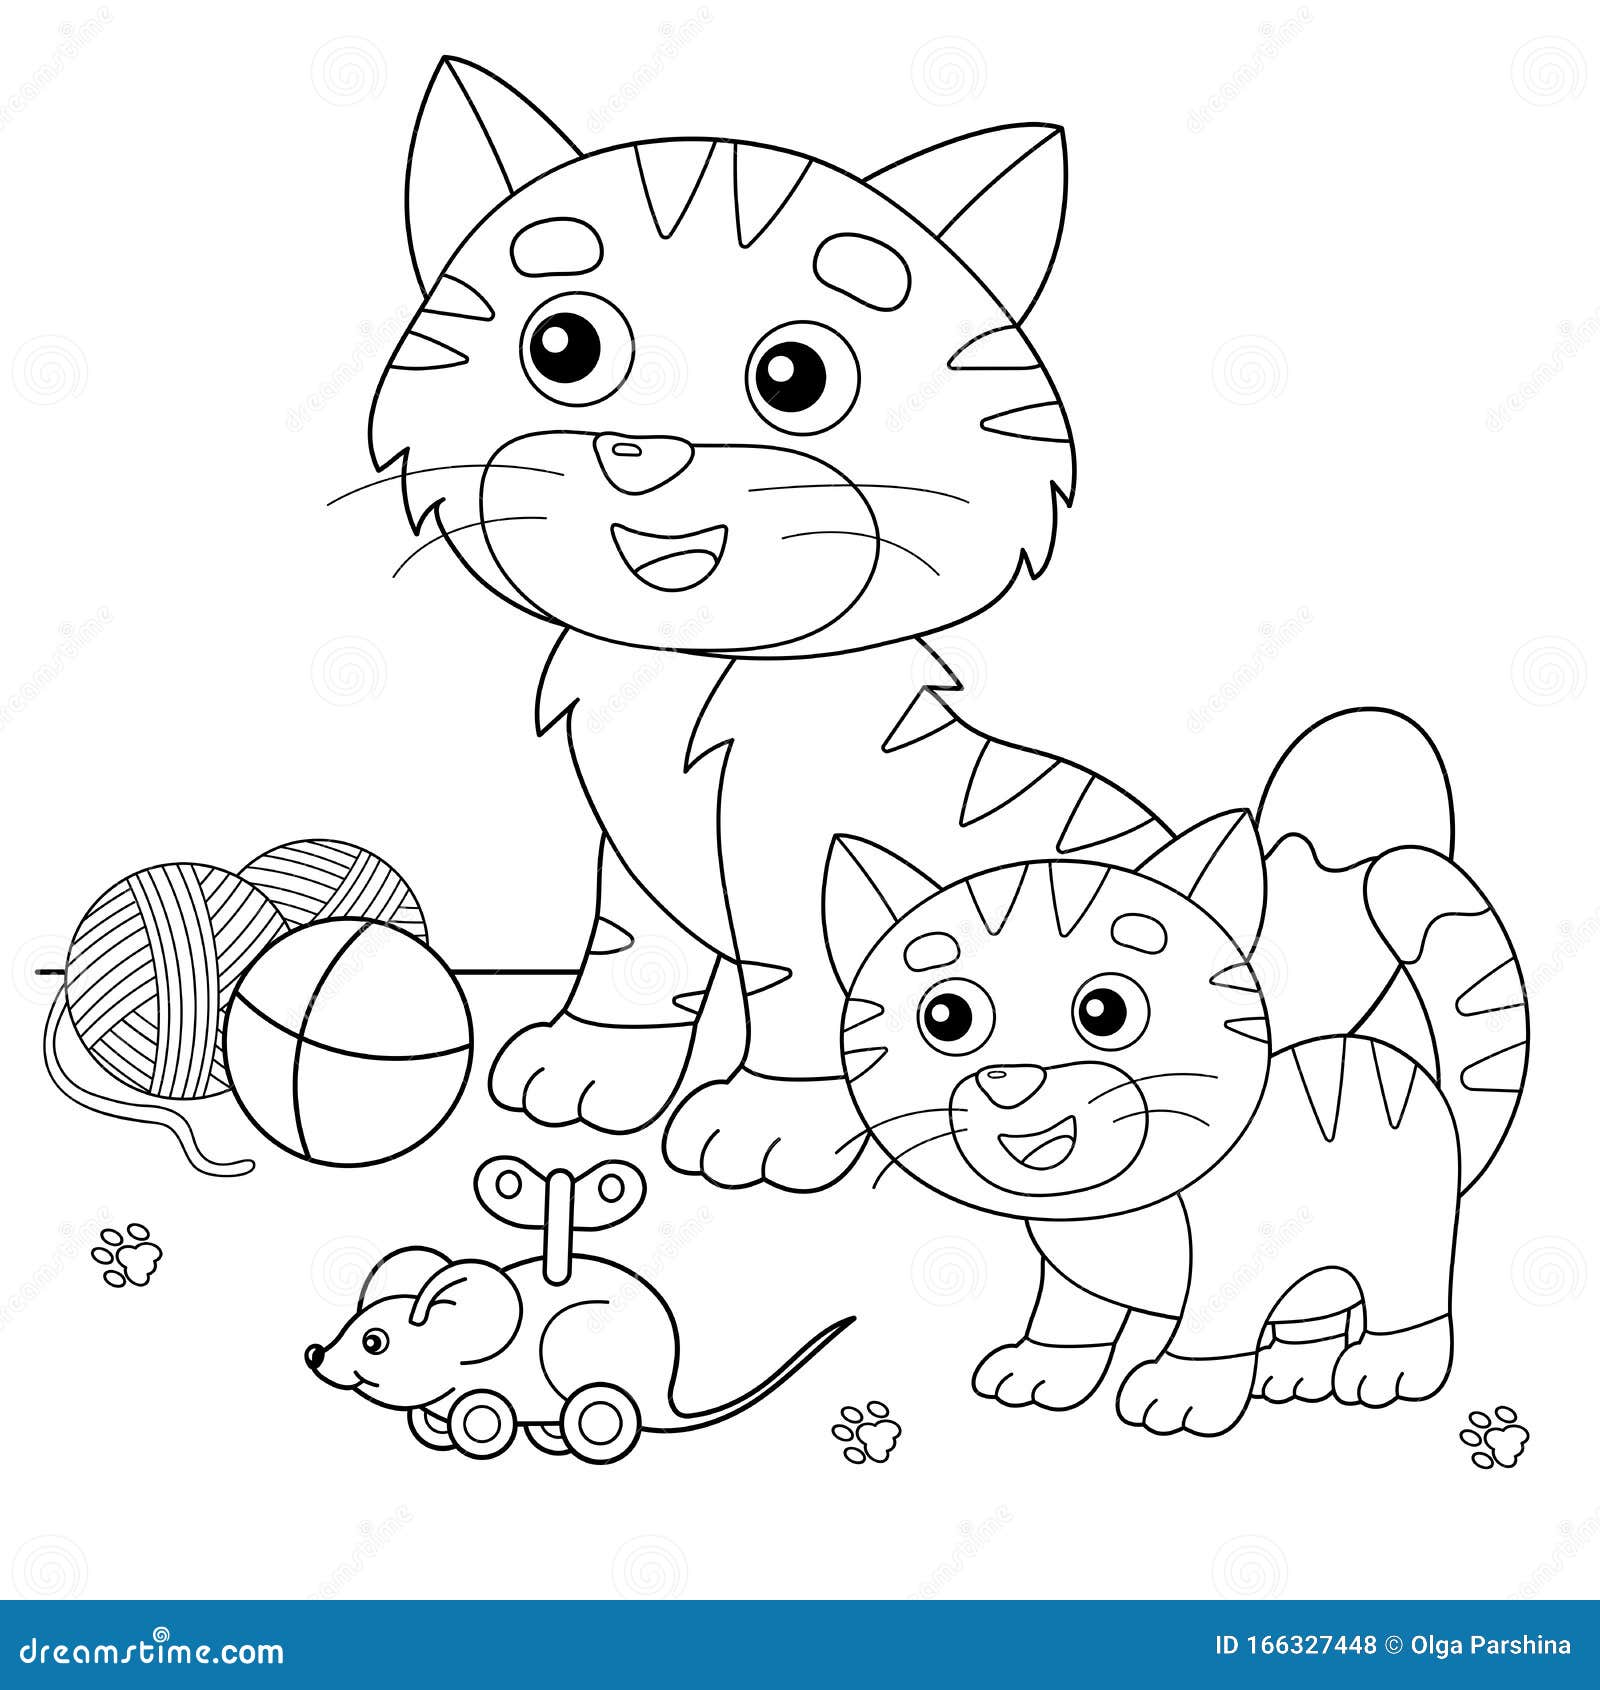 Download Coloring Page Outline Of Cartoon Cat With Kitten And With ...